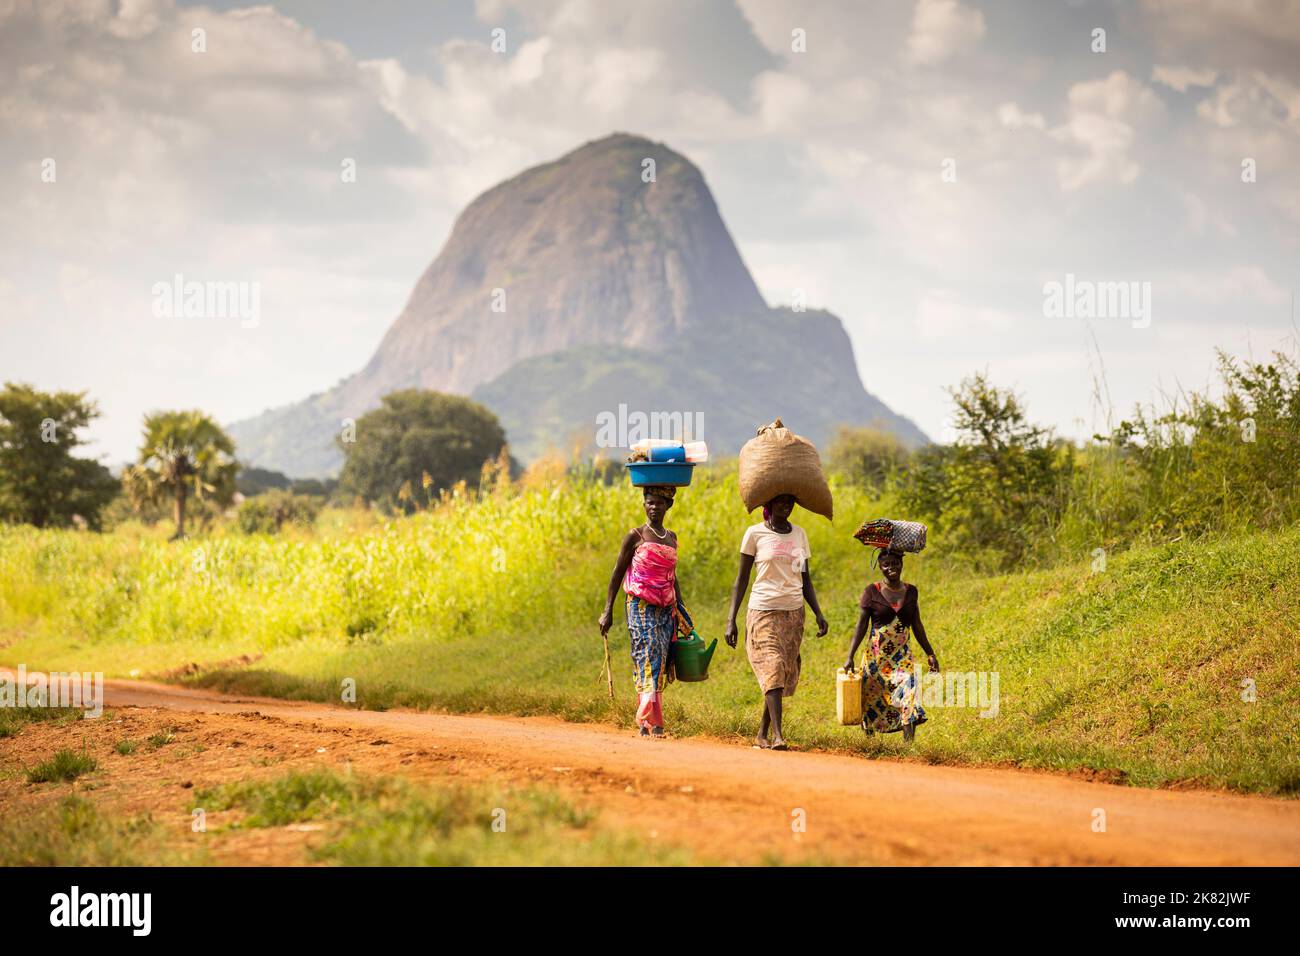 Women walk down a remote road together beneath dramatic mountain scenery in Uganda, East Africa. Stock Photo